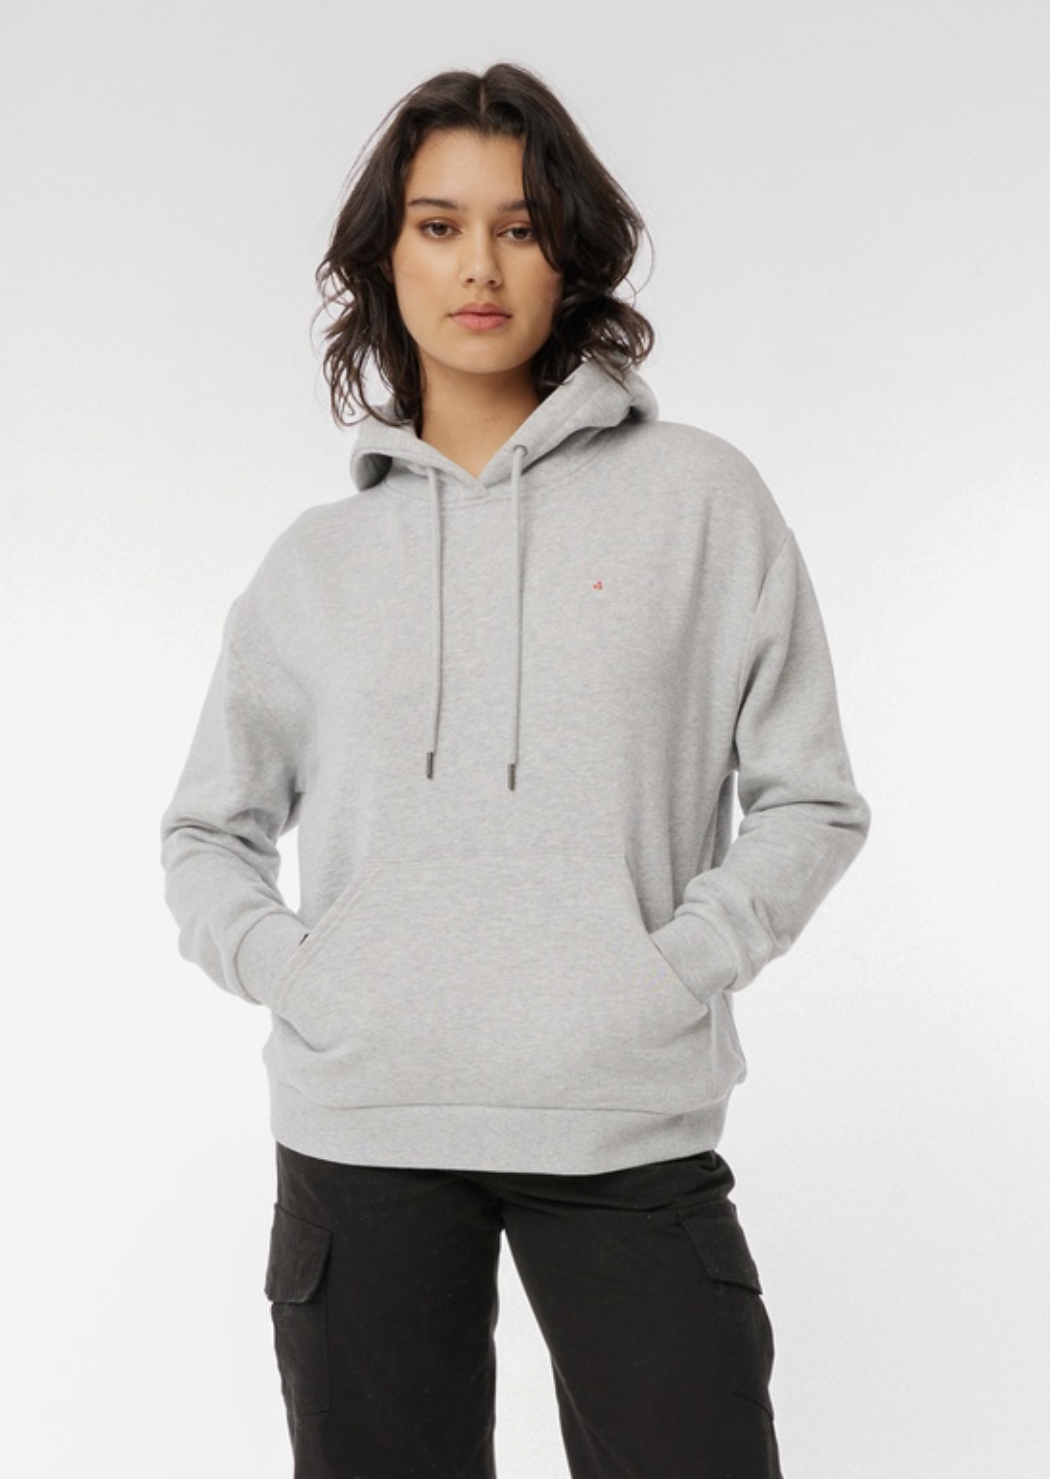 Huffer Slouch Hoodie 350/Stack Moto Grey Marle|Abbey Road